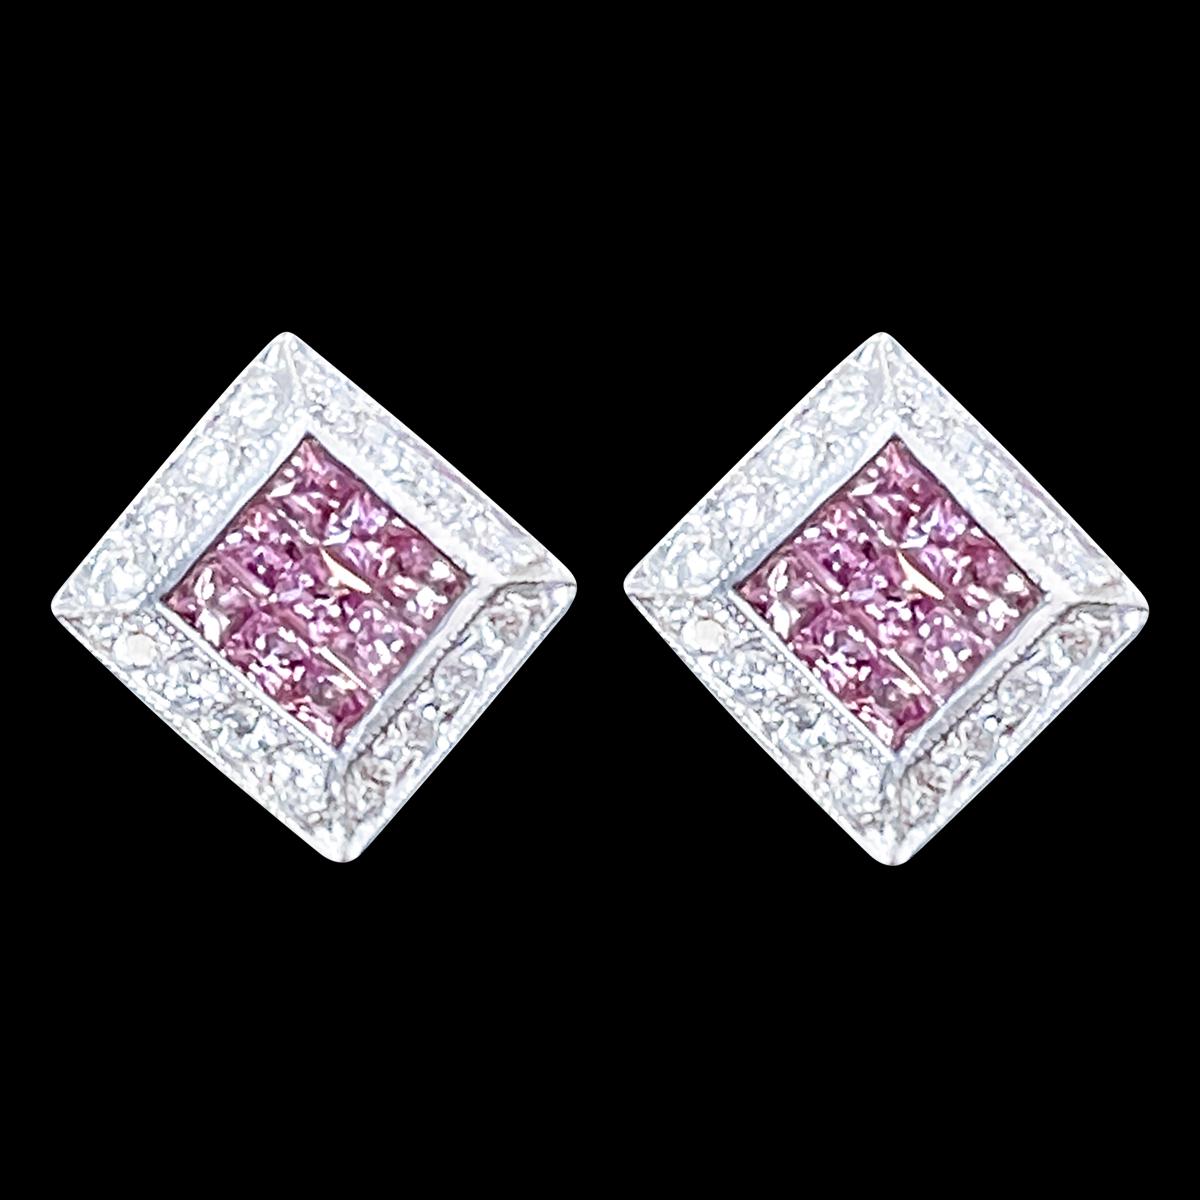 Invisible Mystery Set Pink Sapphire & Diamond Stud Earring 14 Karat White Gold
perfect pair made in  14 Karat White  gold . 
14 K gold 7.6 Grams
 Diamonds: approximate 0.70 carat , VS Quality G color
 Pink sapphire   natural  : approximately 0.6  Ct